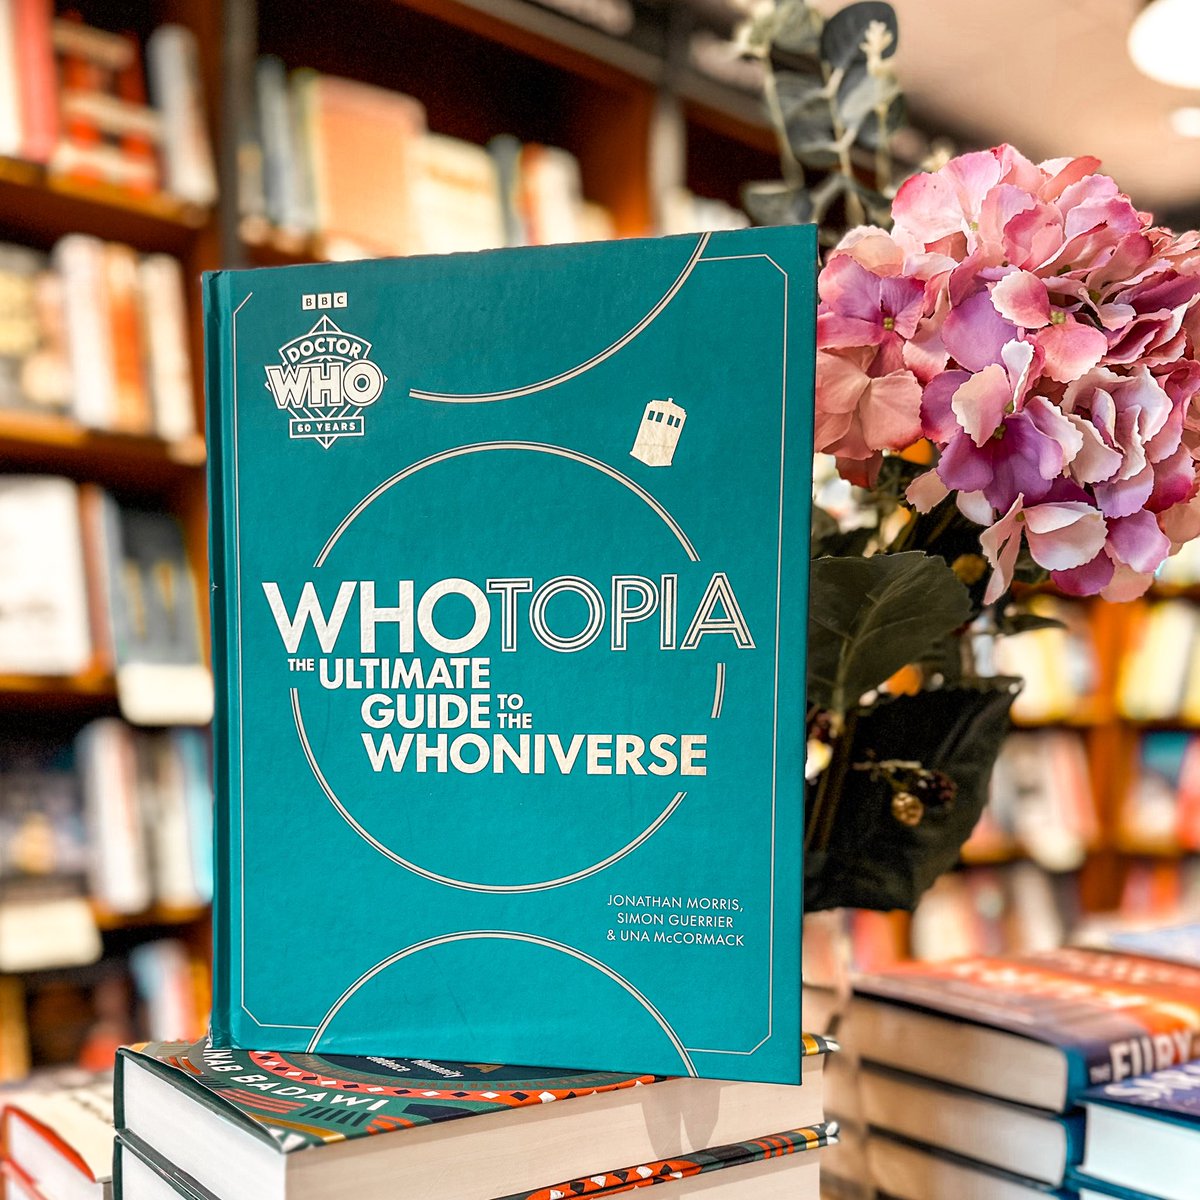 Doctor Who is back and we have Whotopia in stock! 🛸

The ultimate guide to the Whoniverse celebrates sixty years of this iconic show!

First stop? Everywhere! 🌌

#bookstagram #waterstonesnorthallerton #northallerton #bookshop #lovenorthallerton #waterstones #doctorwho